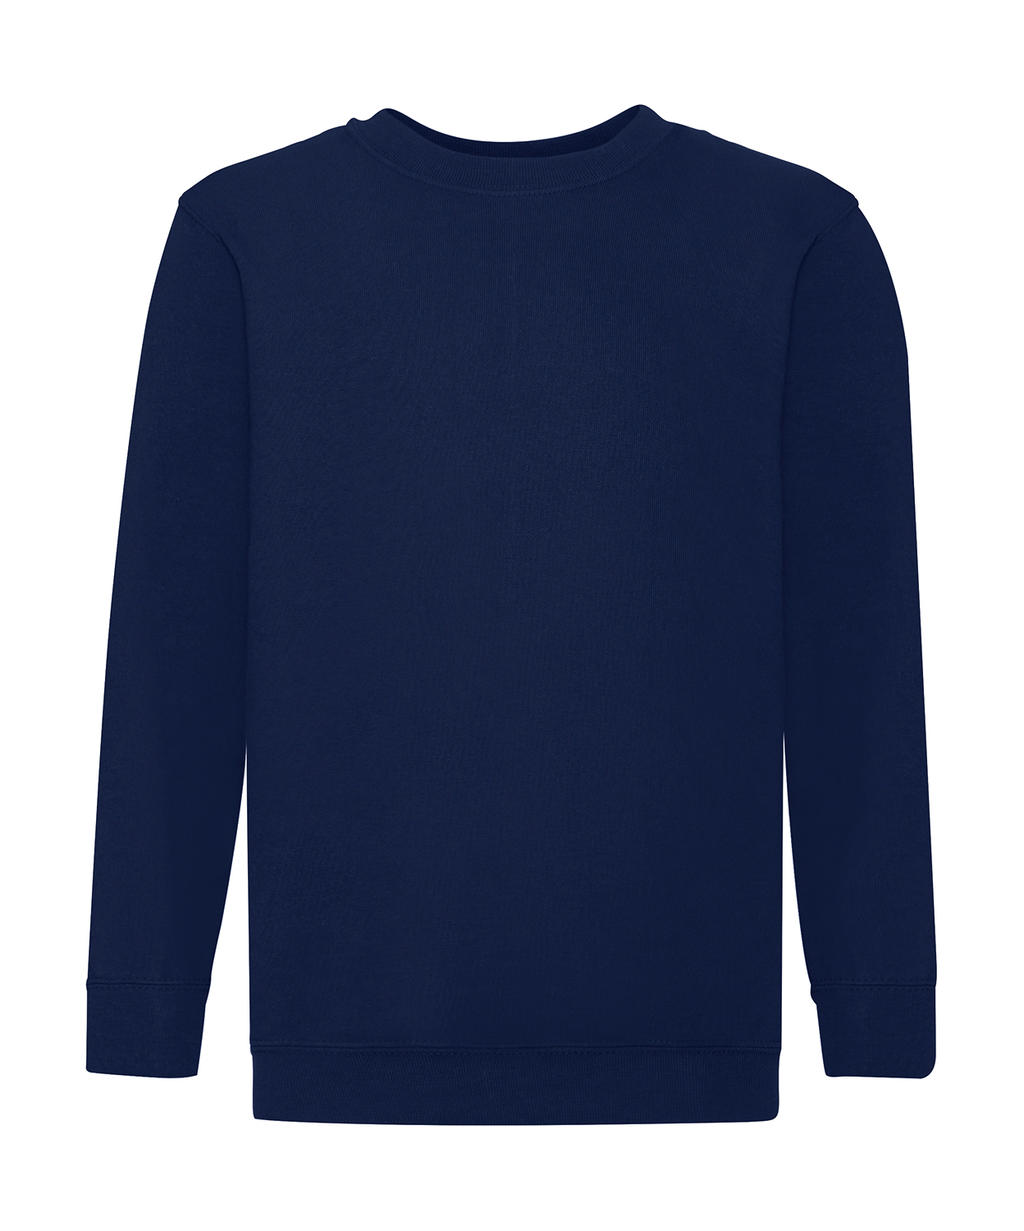  Kids Classic Set-In Sweat in Farbe Navy